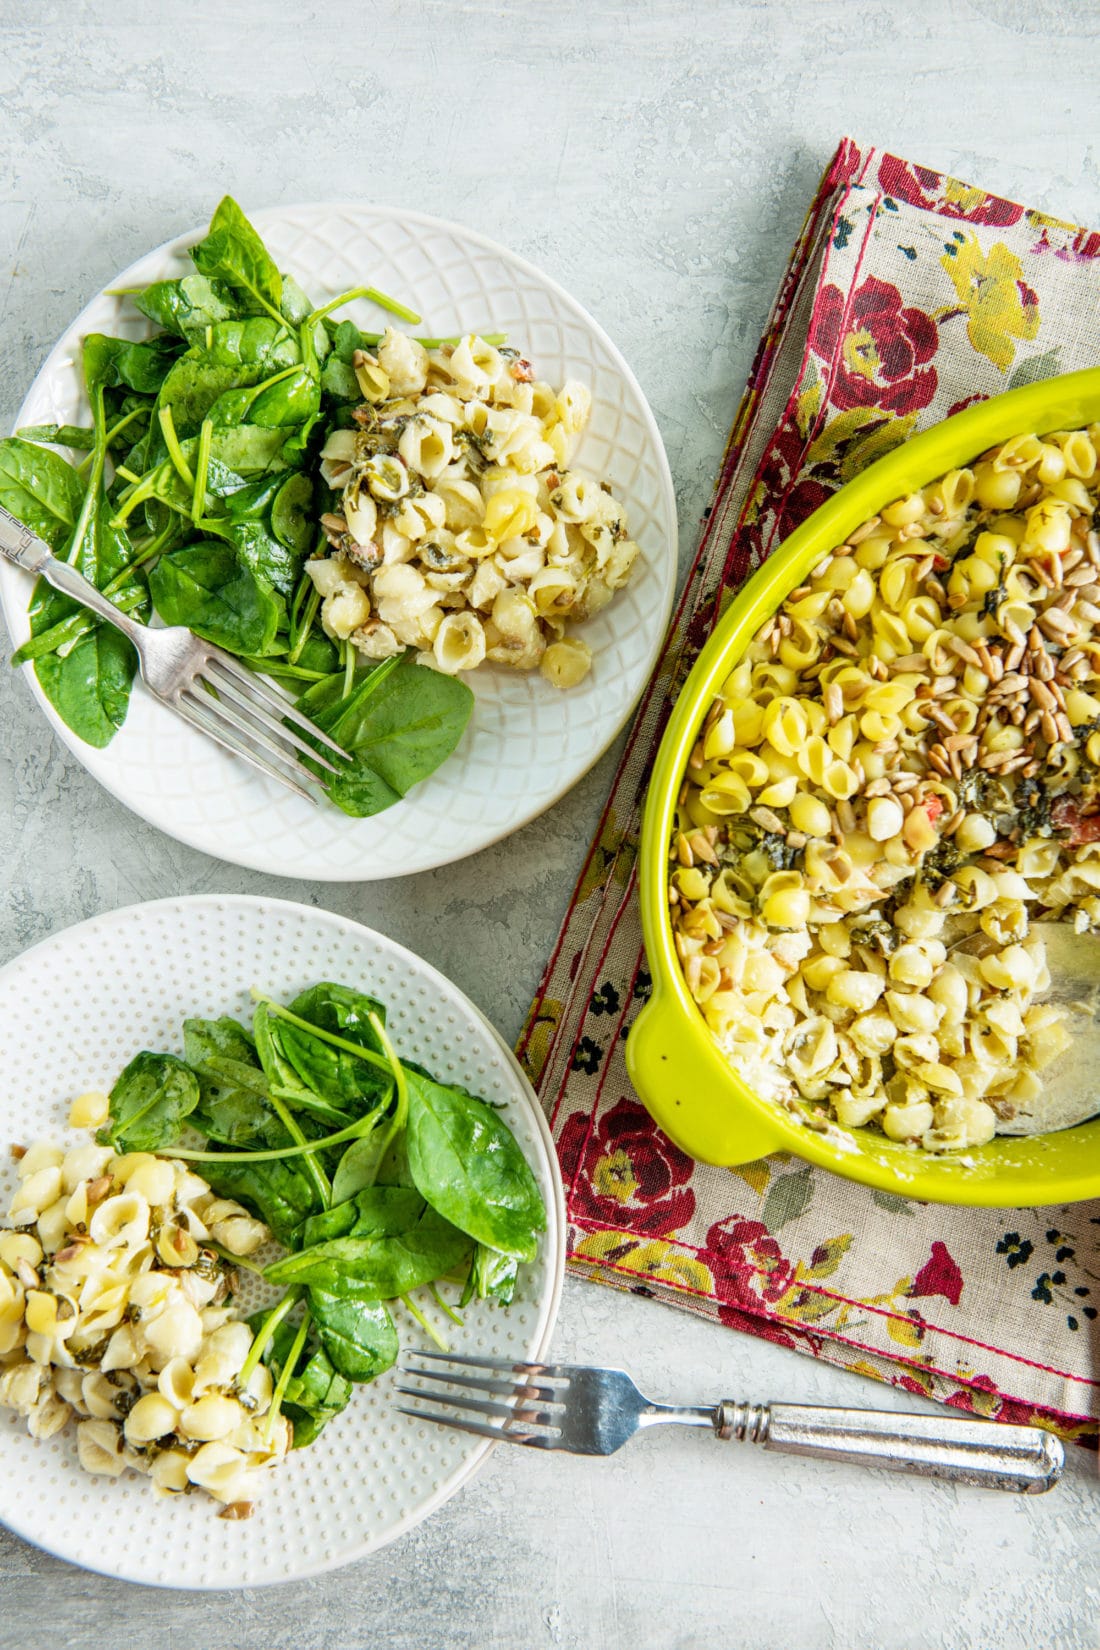 Spinach Goat Cheese Baked Pasta with Sunflower Seeds / Katie Workman / themom100.com / Photo by Cheyenne Cohen